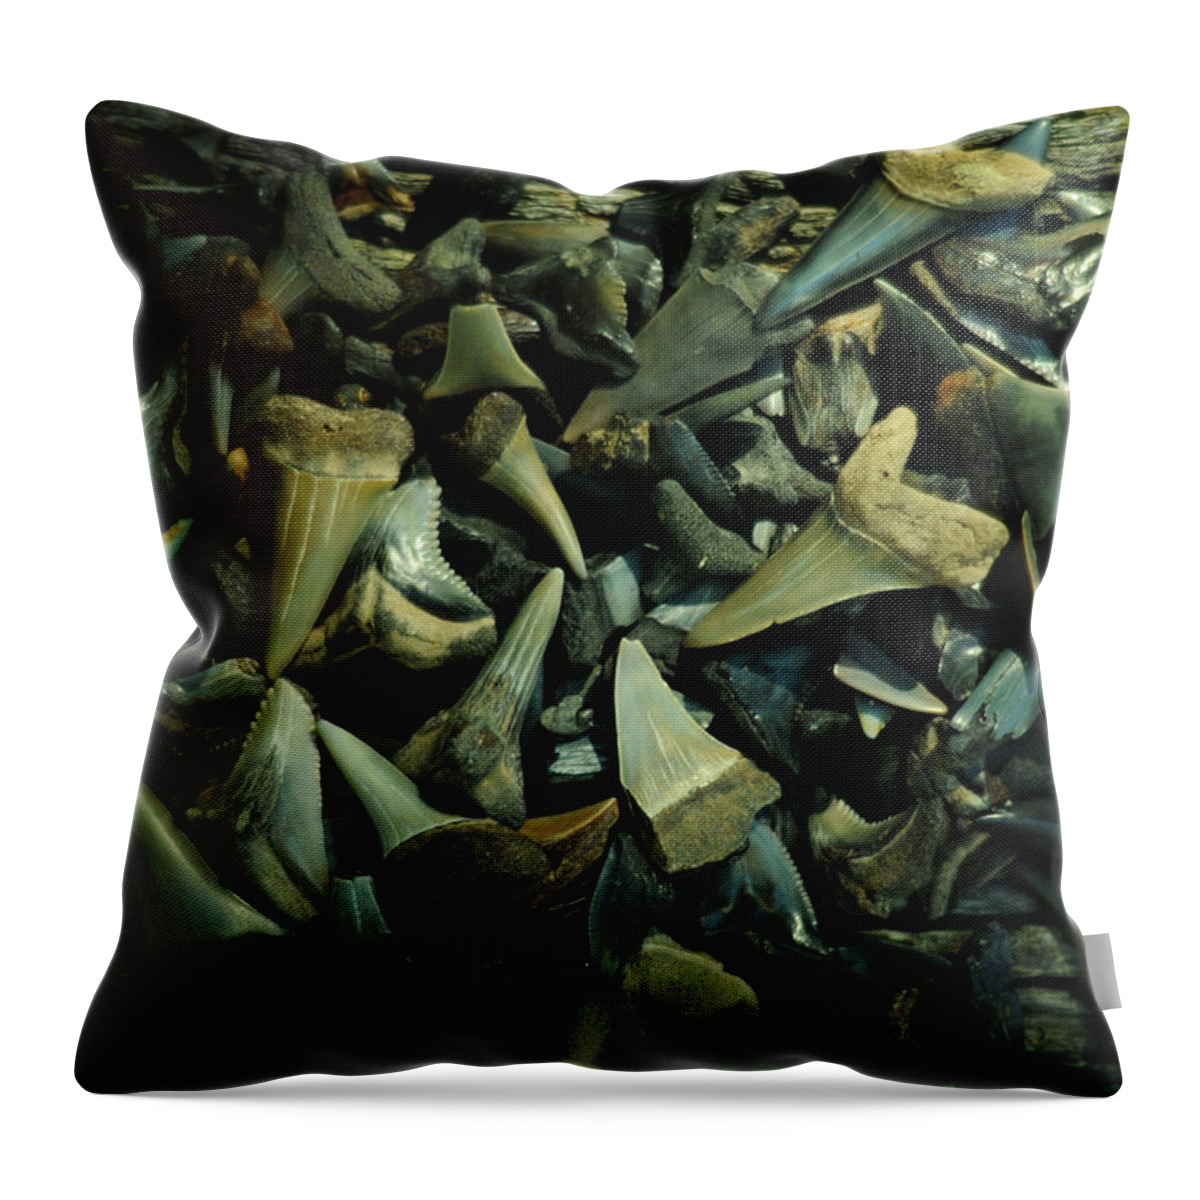 Shark Teeth Throw Pillow featuring the photograph Miocene Fossil Shark Tooth Assortment by Rebecca Sherman